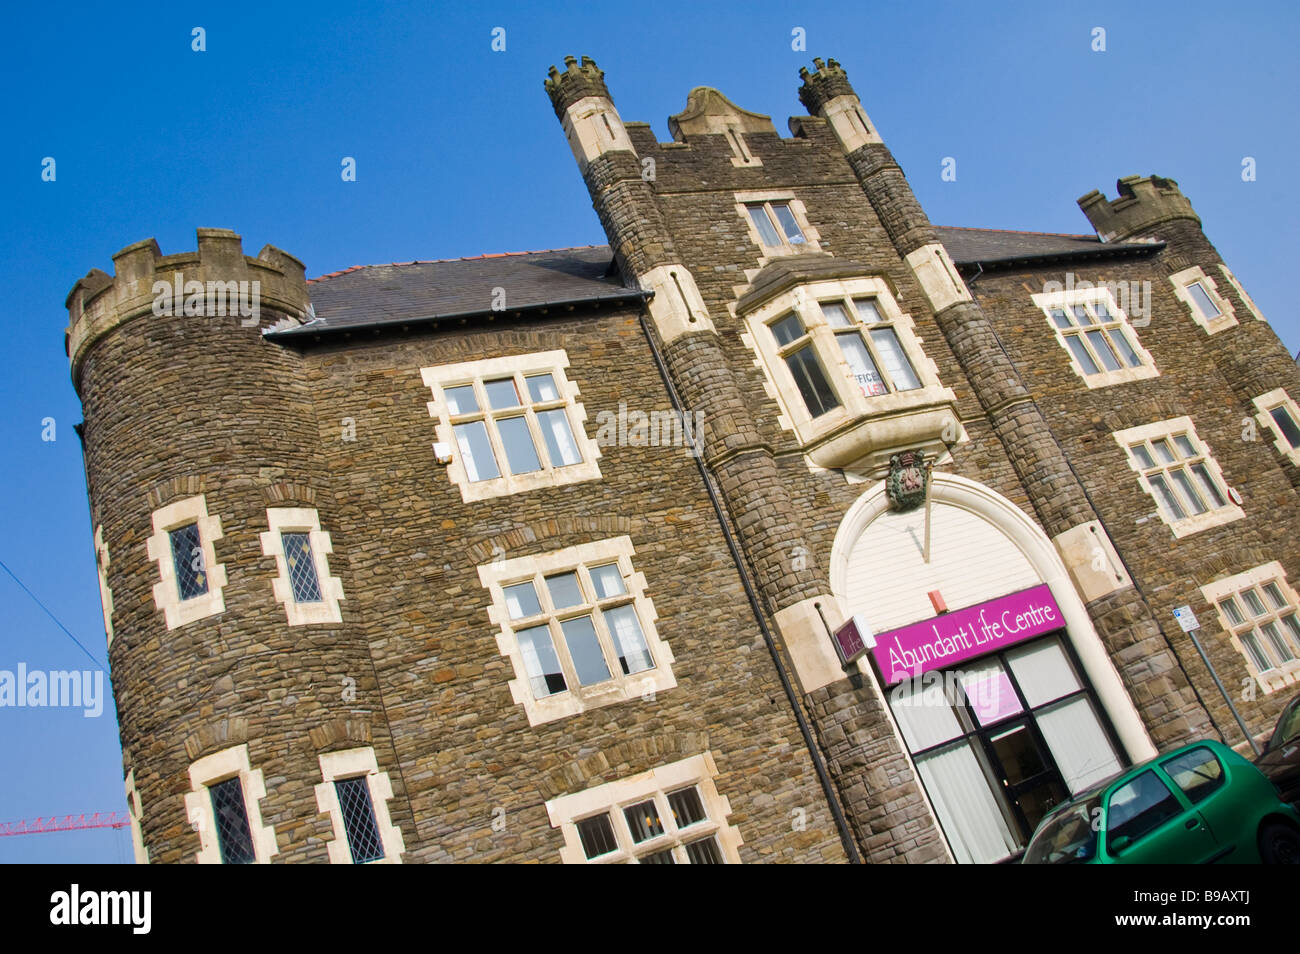 Abundant Life Centre church in Victorian building Newport South Wales UK Stock Photo